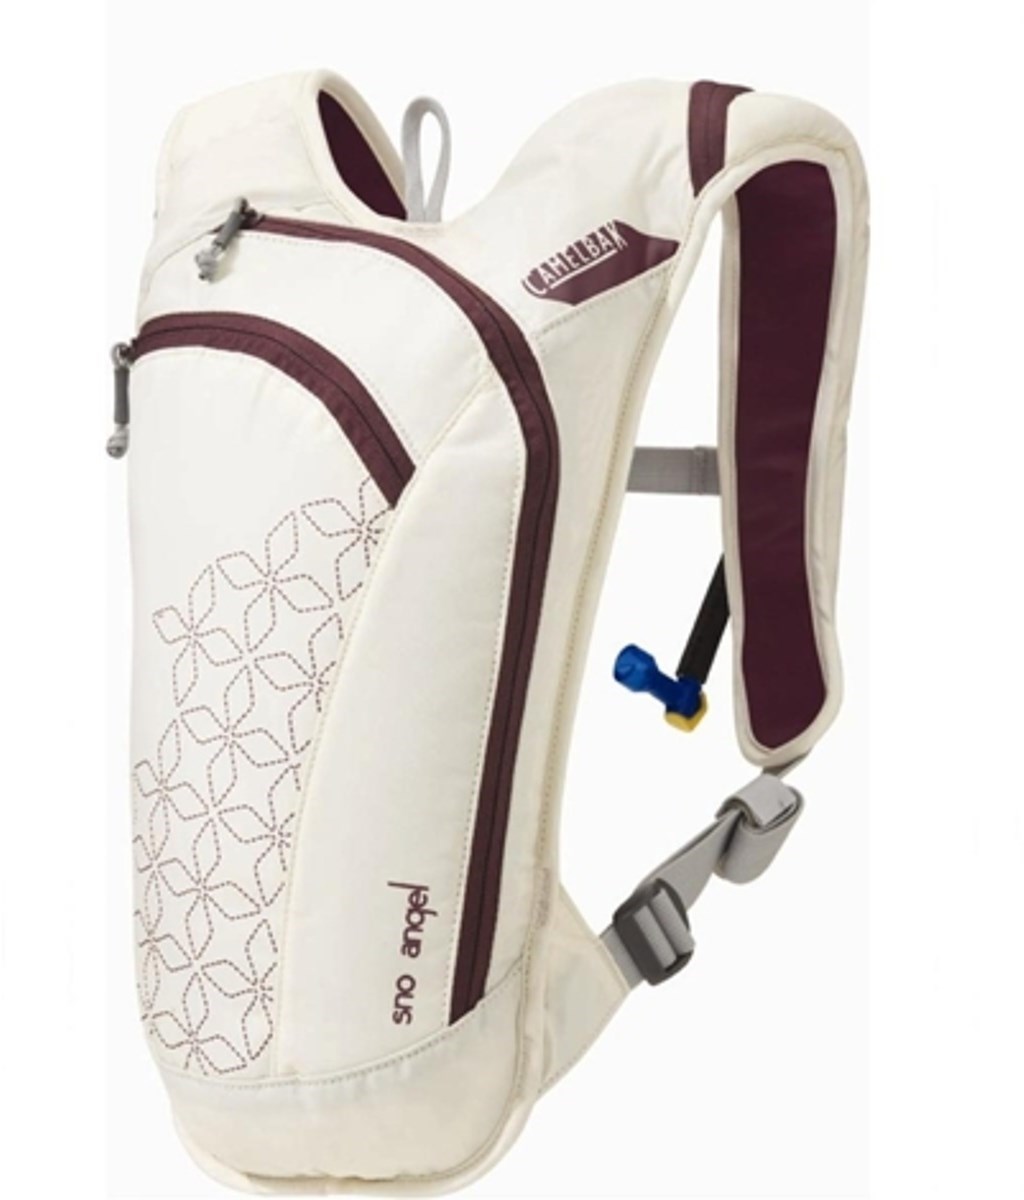 Zyro Womens Snoangel Hydration Pack product image